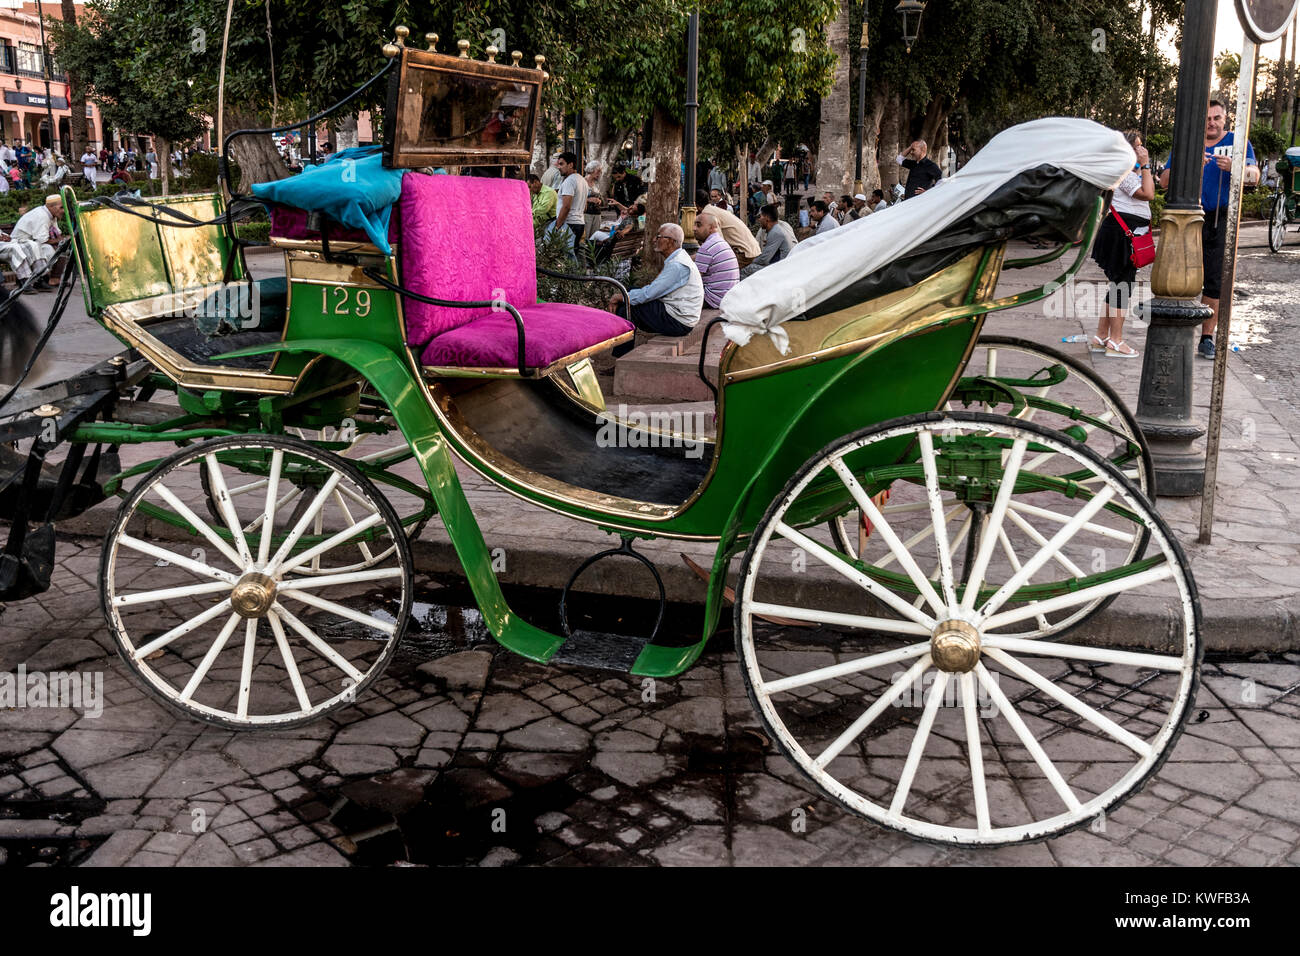 Traditional Caleche or horse drawn carriage. Stock Photo